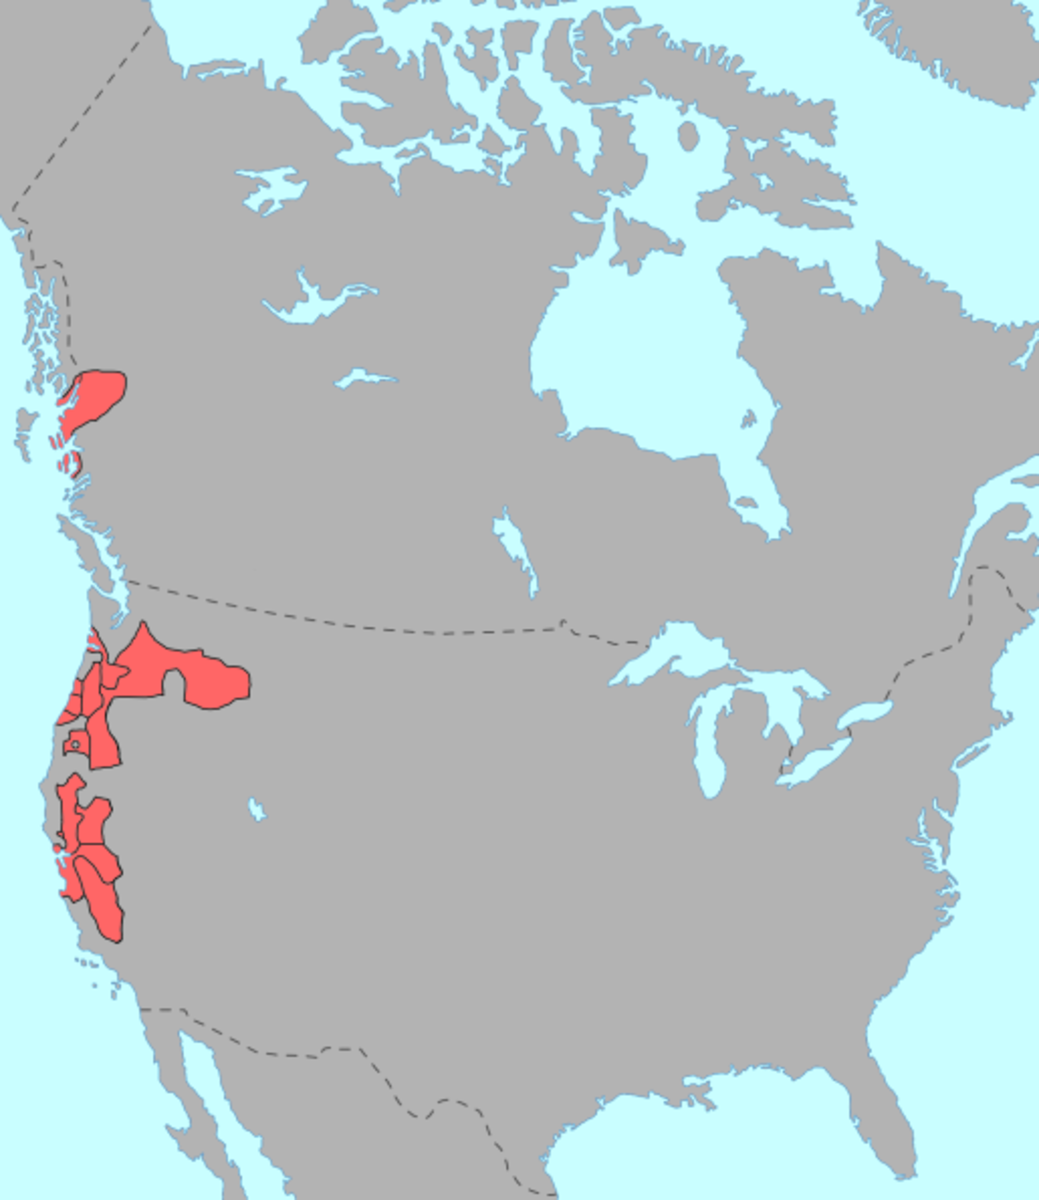 Tsimshian languages and people are related to those in Washington, Oregon, and California. The land area that is home of Tsimshian Peoples is larger than that pictured in BC at the top left spot in this image..